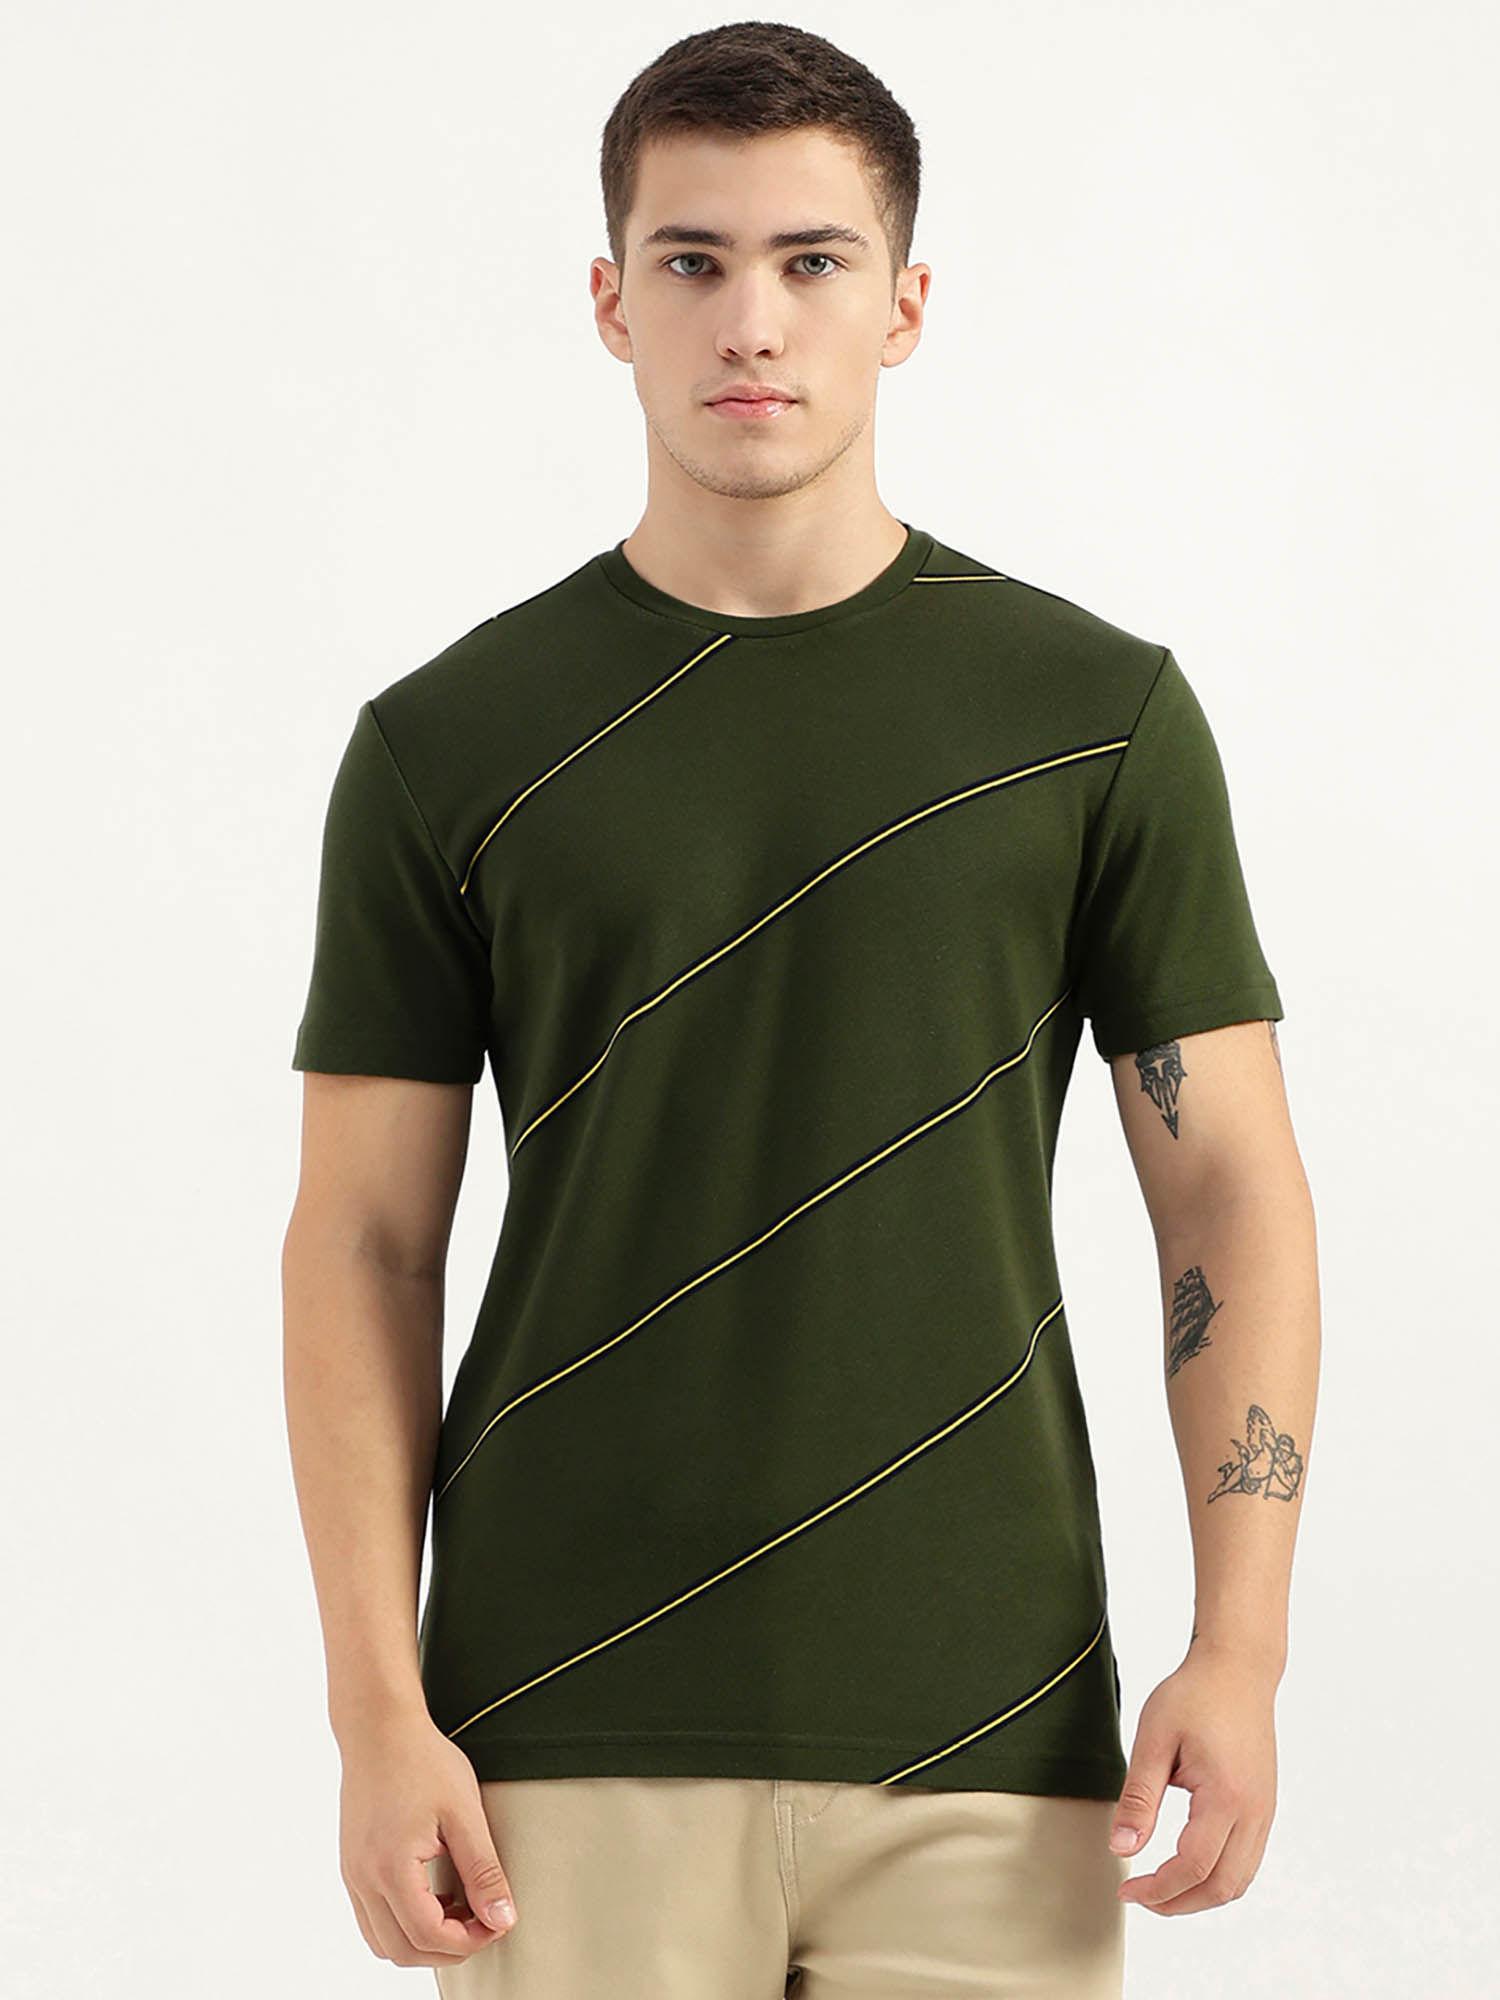 relaxed fit crew neck striped green t-shirt